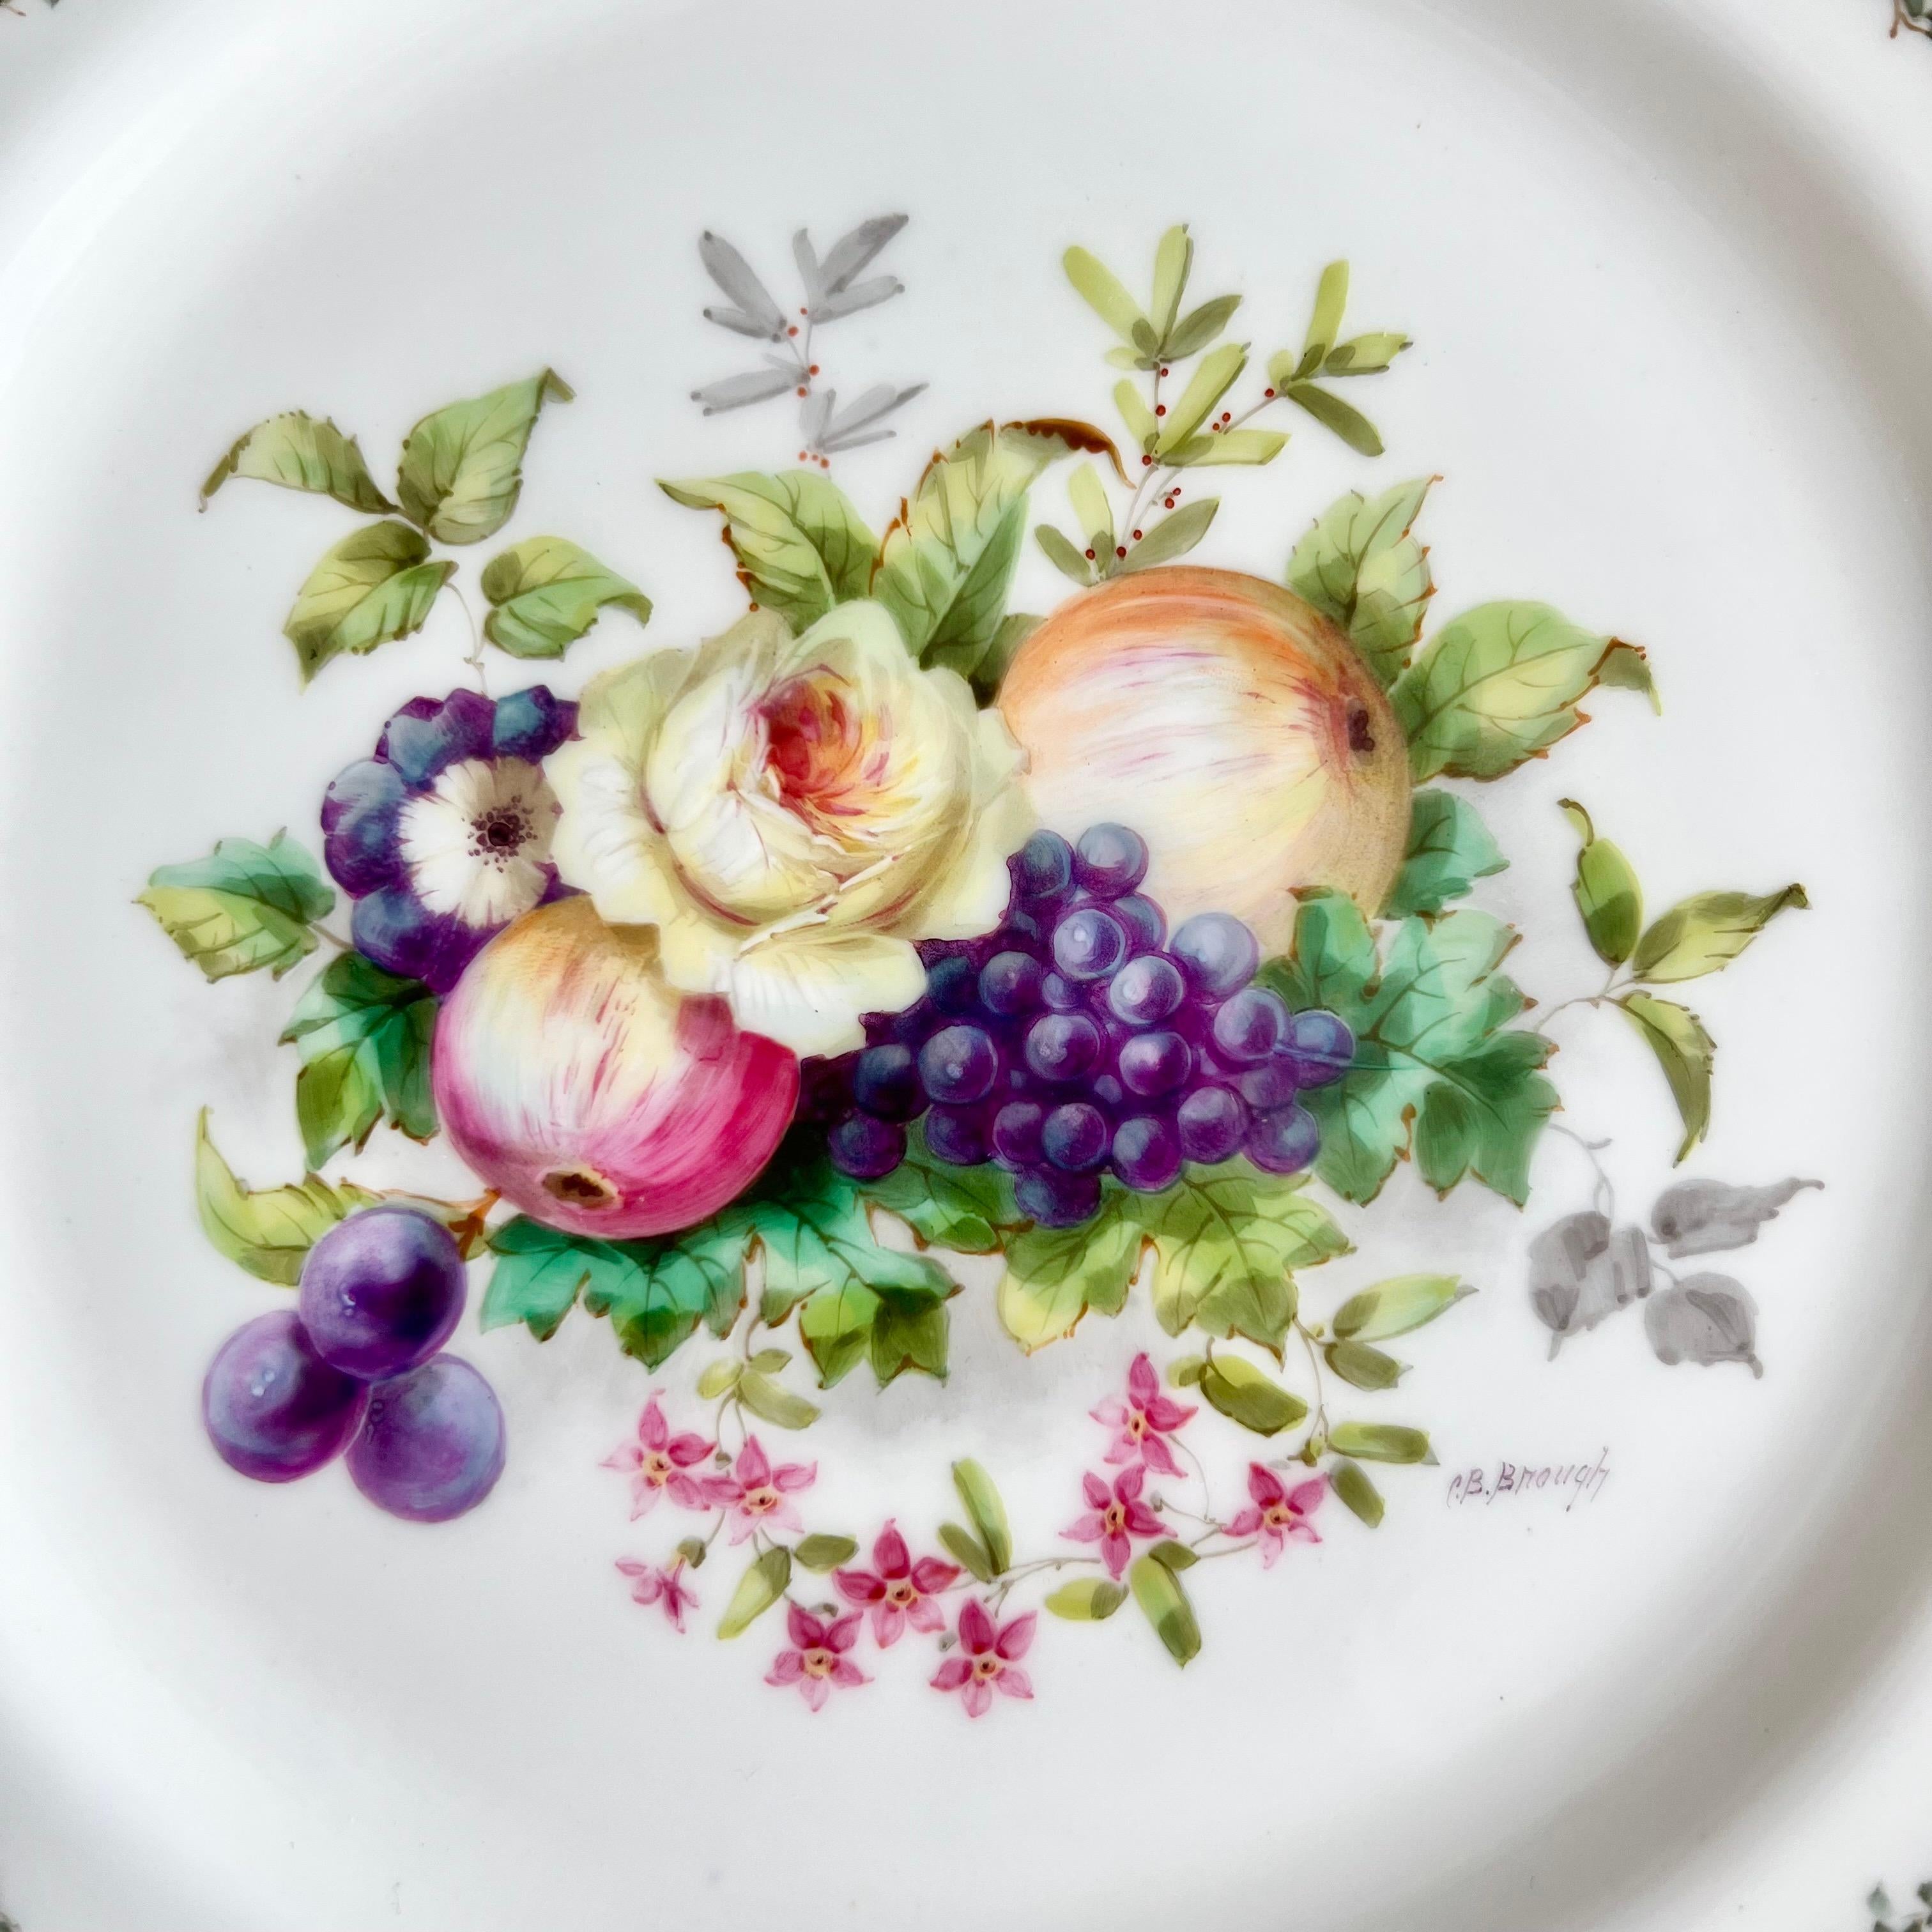 English Royal Doulton Porcelain Pair of Plates, Fruit Paintings by C B Brough, 1903